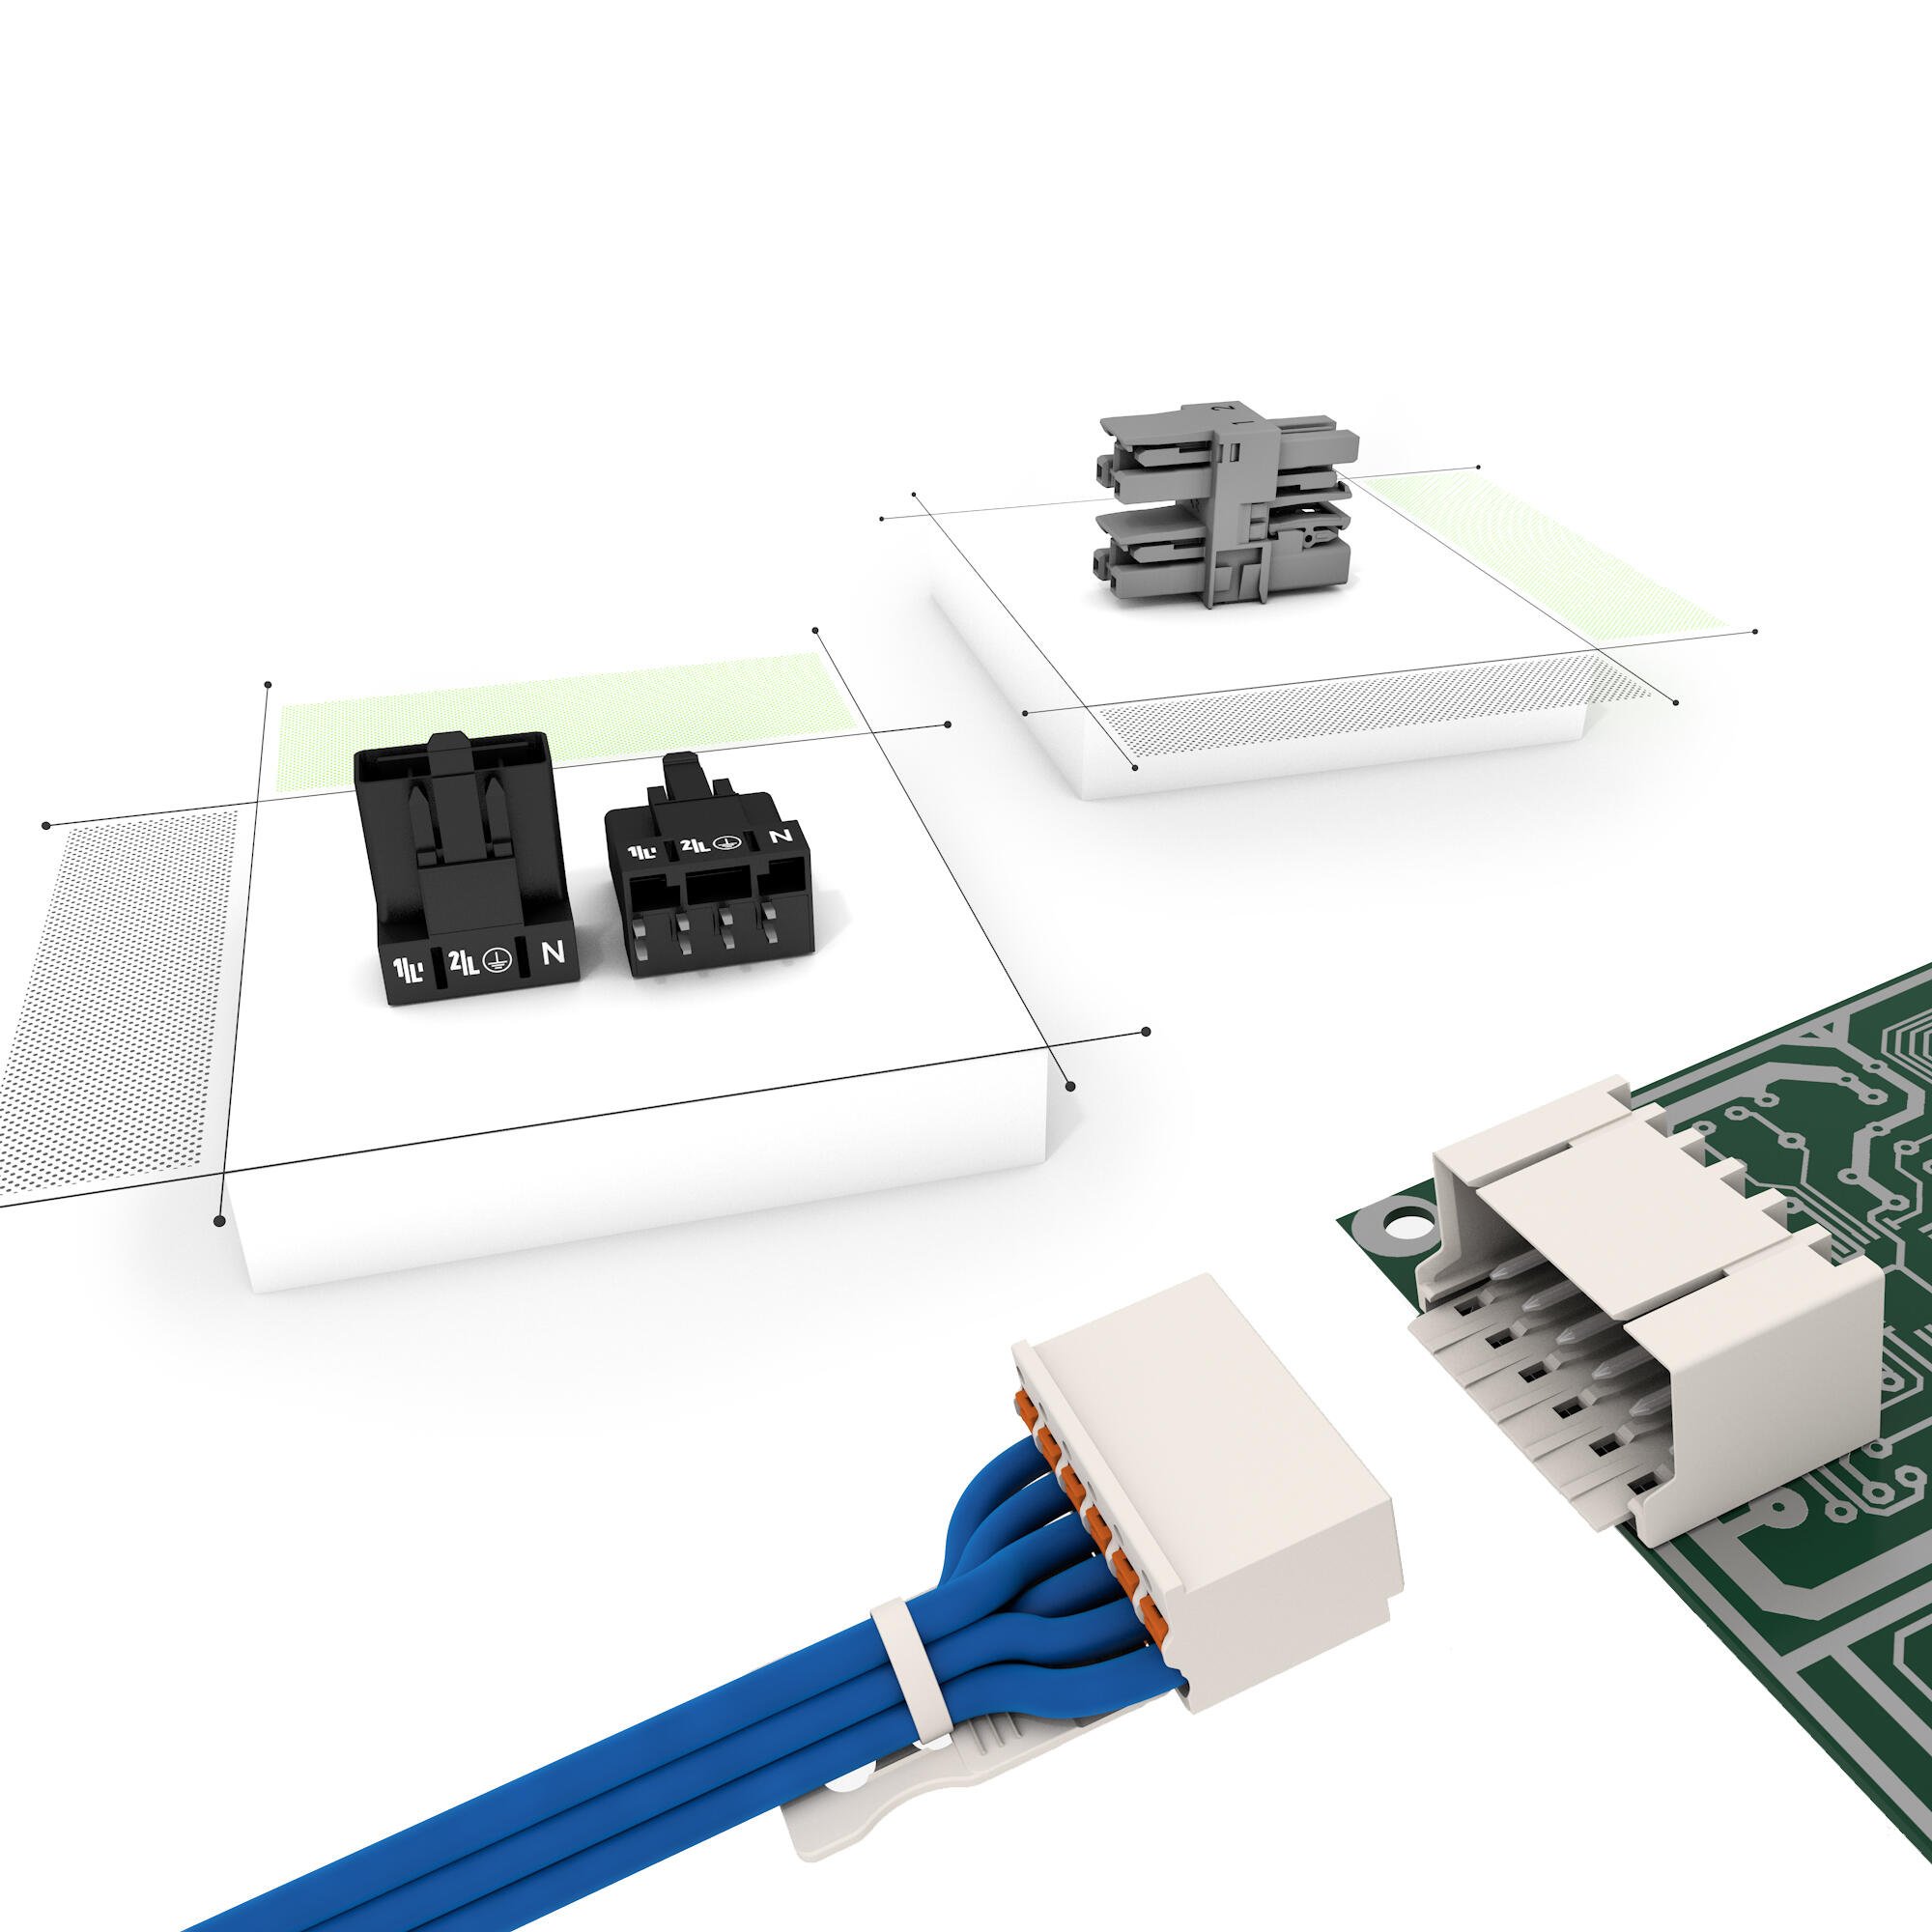 WAGO Pluggable Connectors for printed circuit boards, control cabinets or lighting connections.